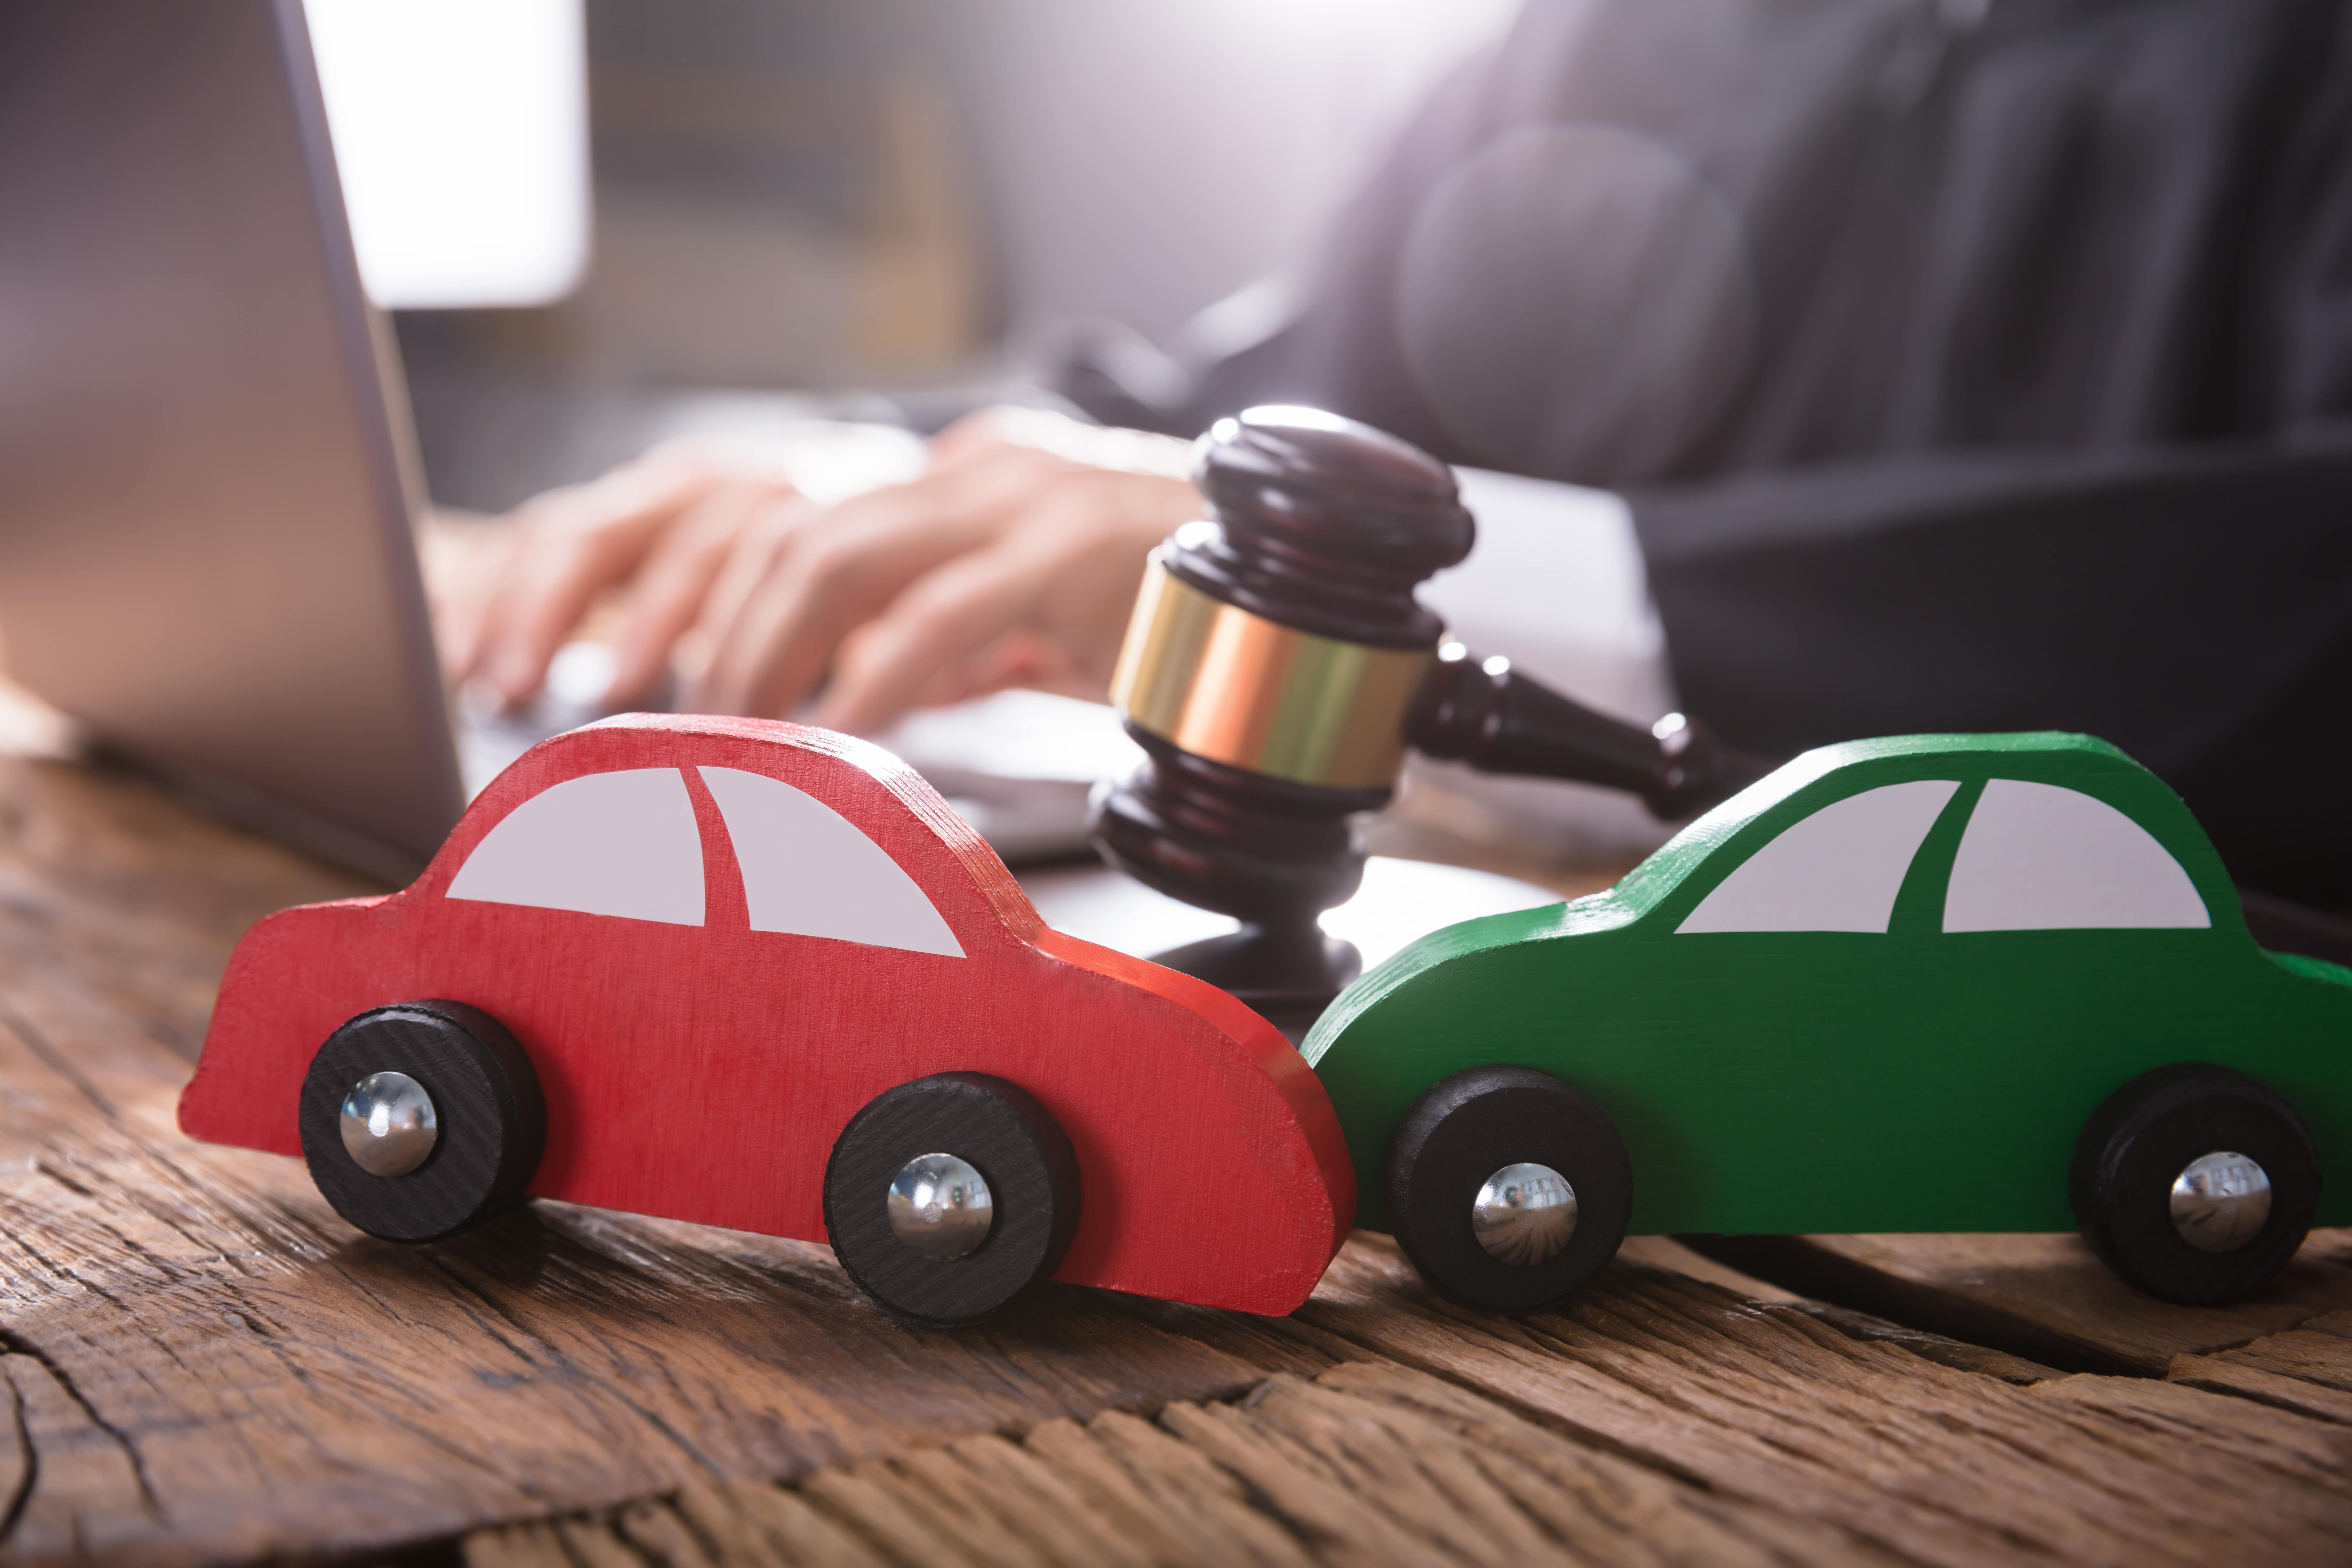 Two toy cars next to a gavel